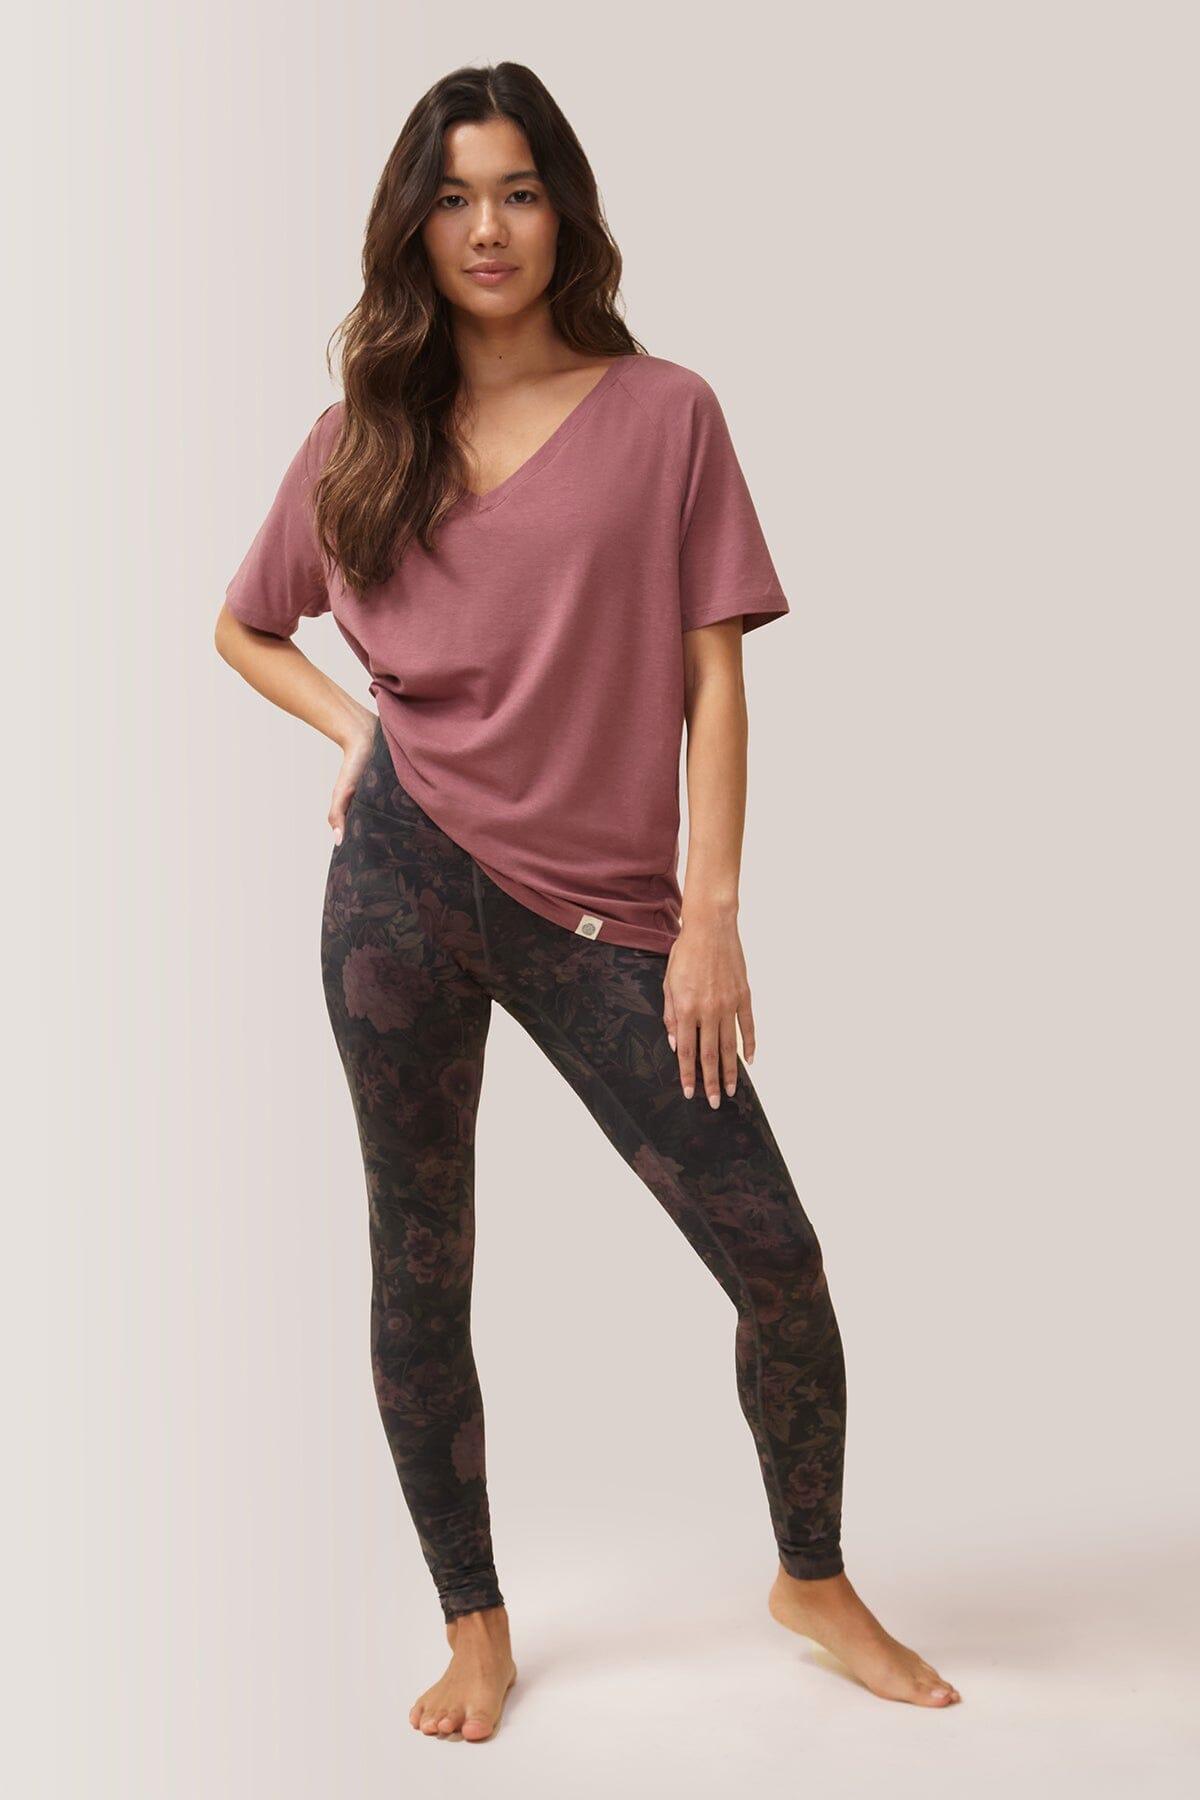 Femme qui porte les leggings Oh So Soft Microfleece de Rose Boreal./ Women wearing the Oh So Soft Mid-Compression Microfleece Legging by Rose Boreal. -Fall Poppies / Pavots Automne